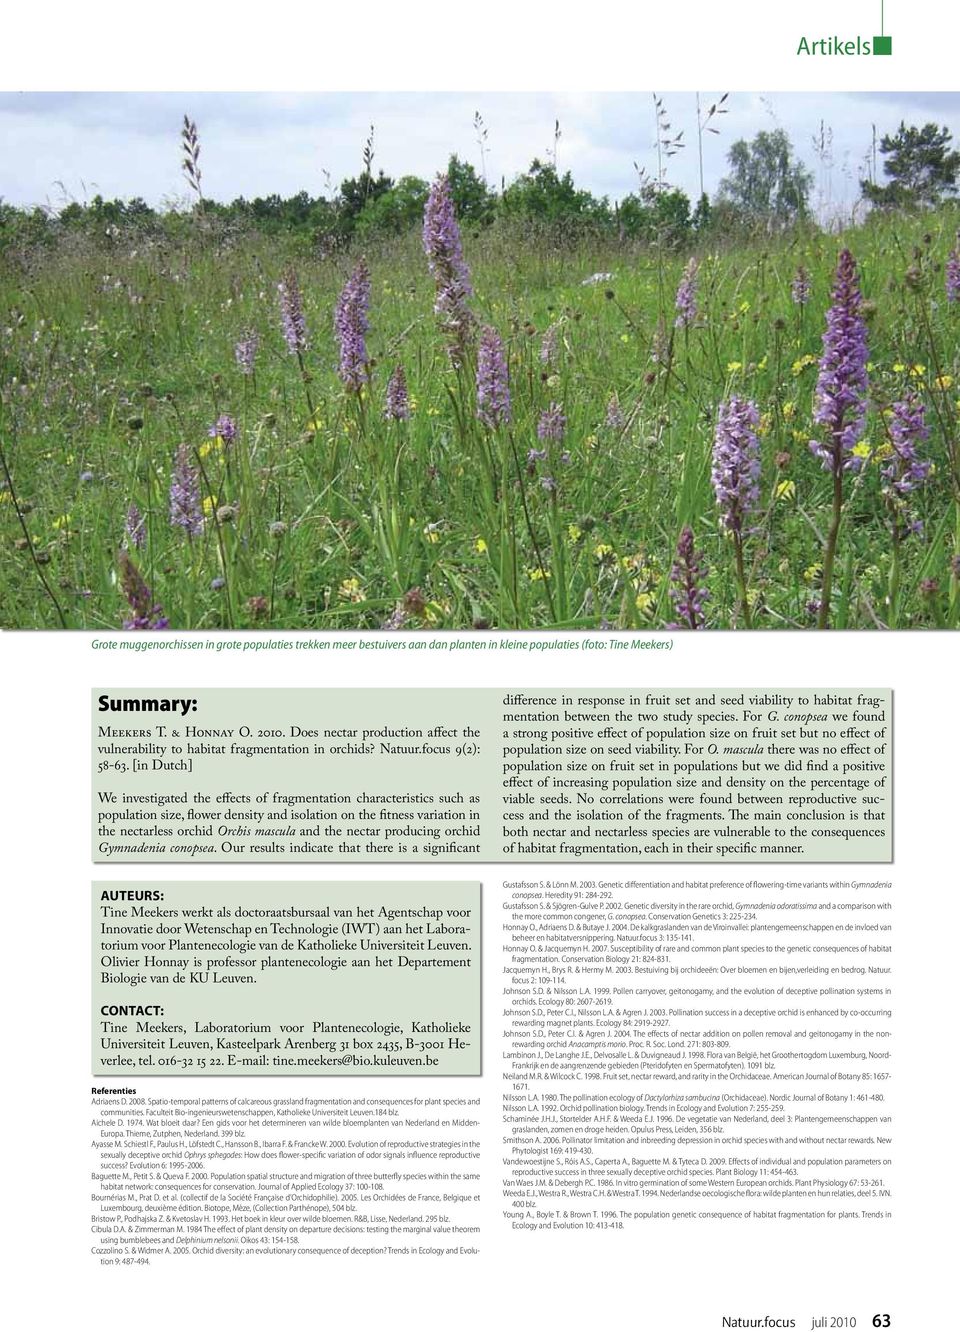 [in Dutch] We investigated the effects of fragmentation characteristics such as population size, flower density and isolation on the fitness variation in the nectarless orchid Orchis mascula and the